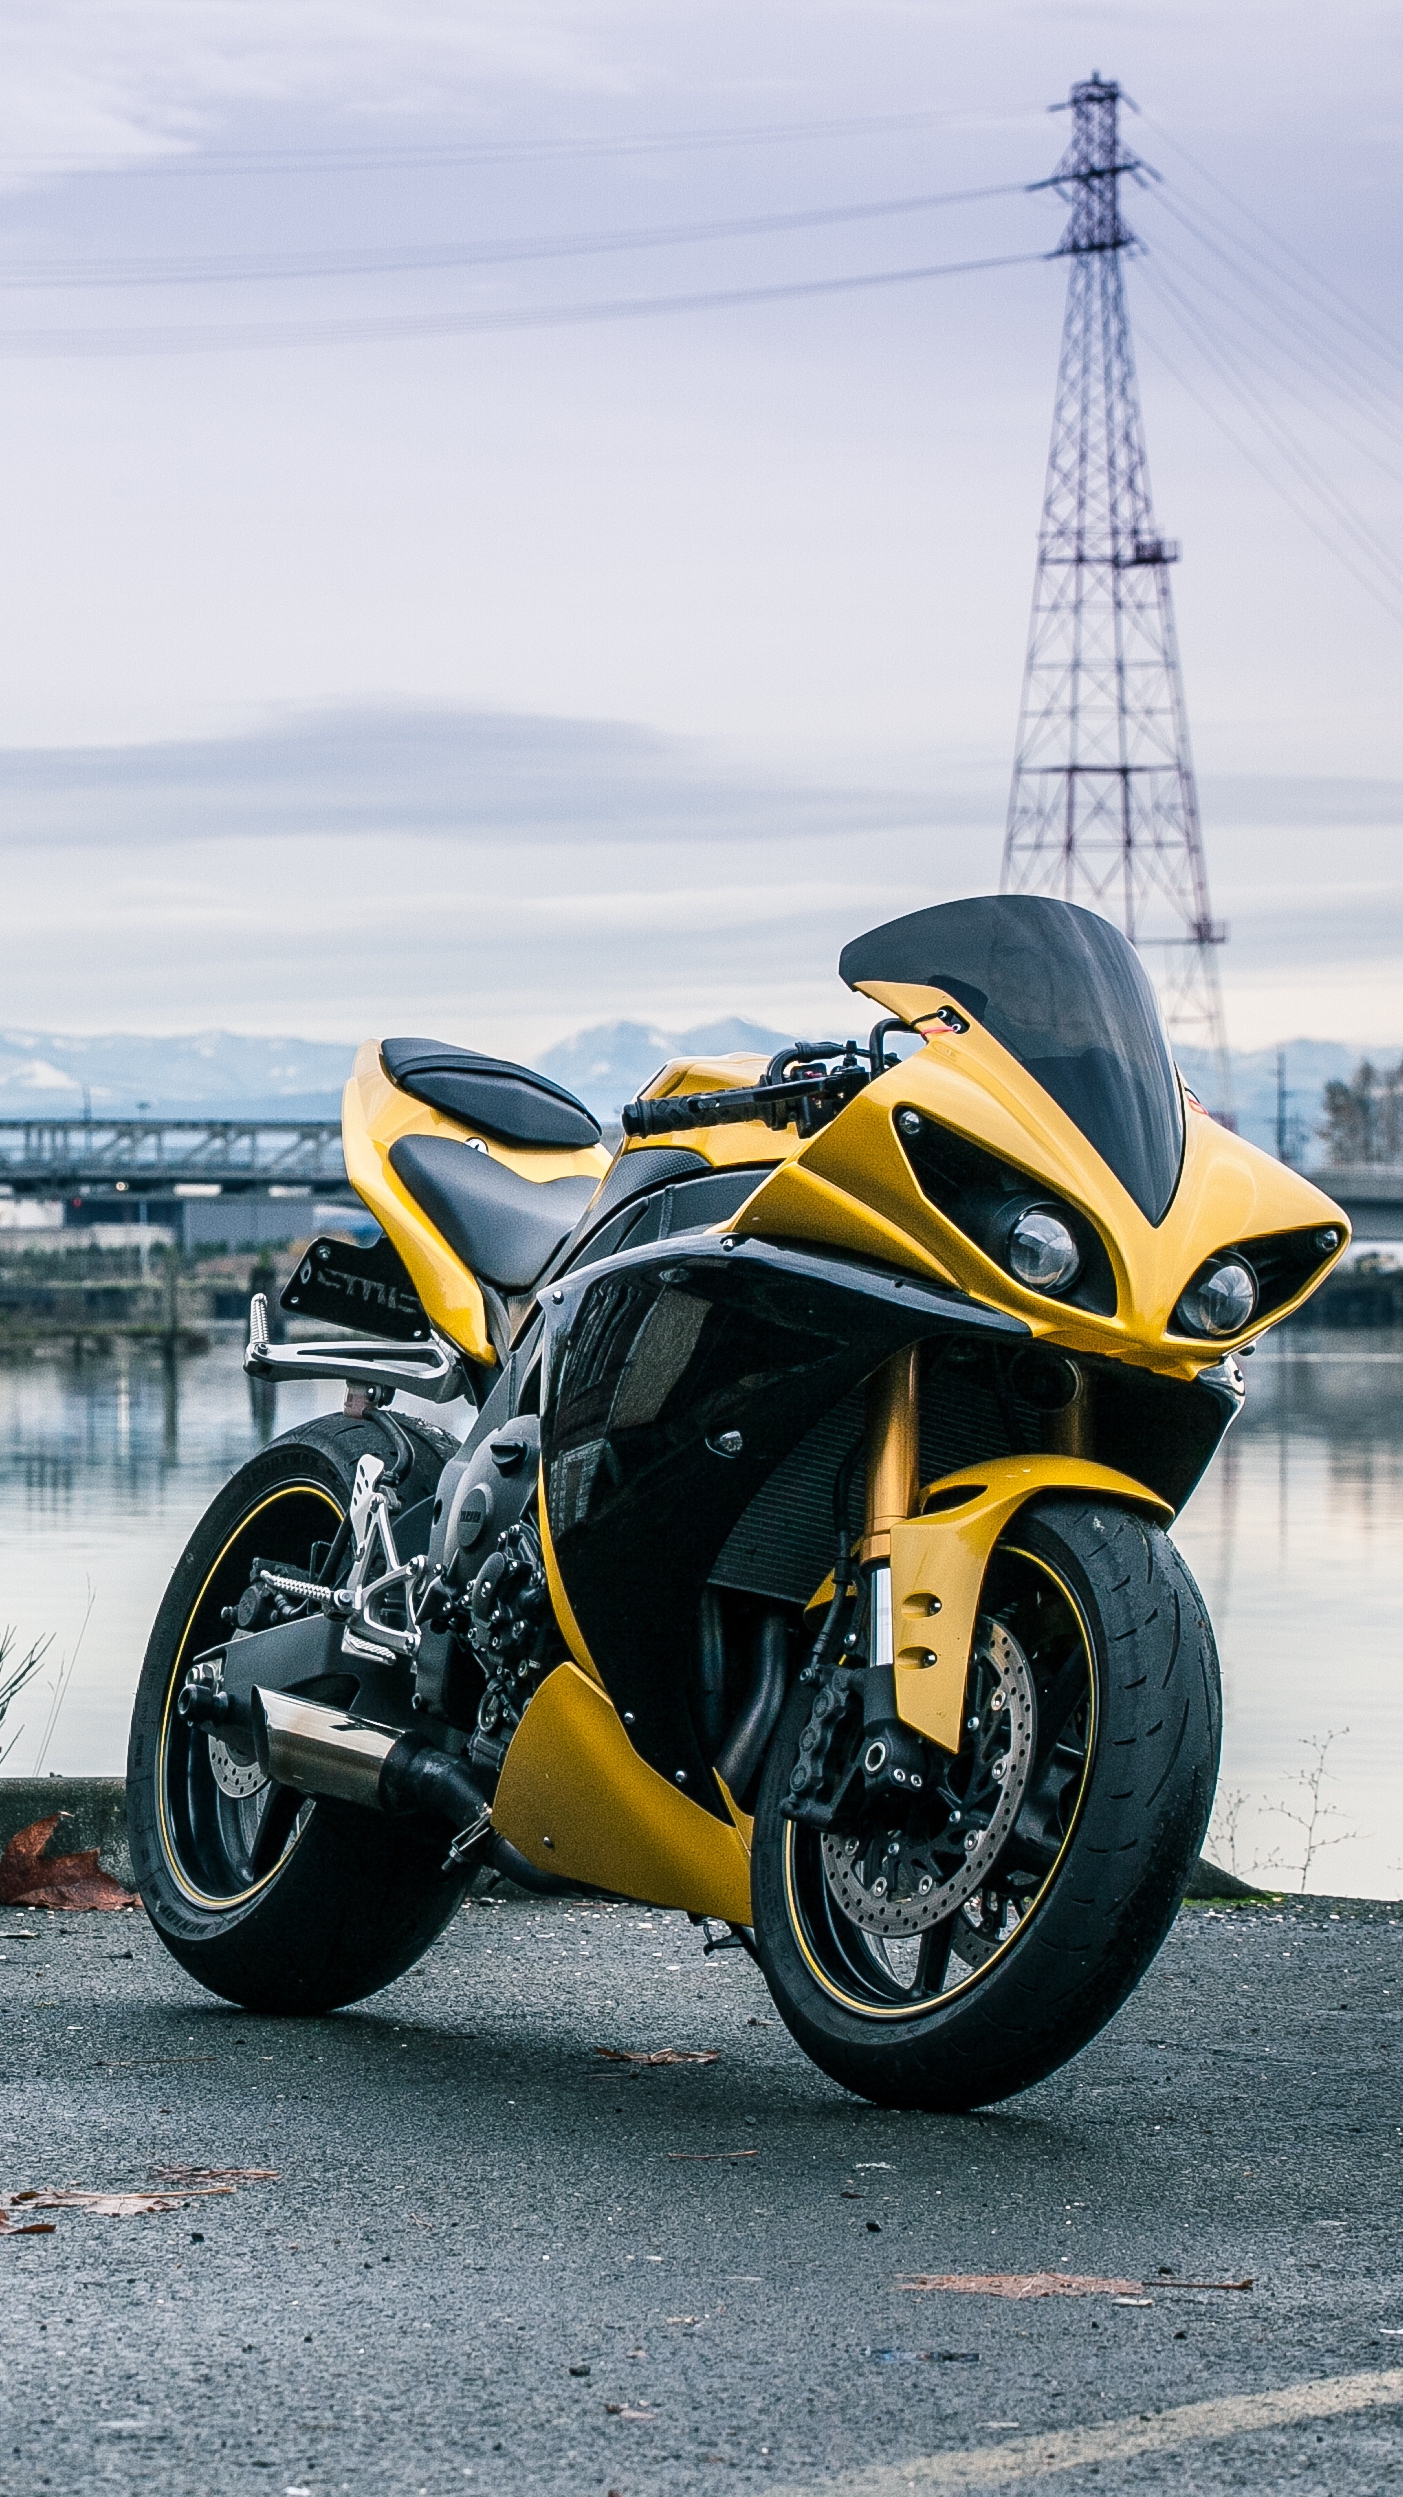 Yamaha-R1-Yellow-iPhone-Wallpaper - iPhone Wallpapers : iPhone Wallpapers